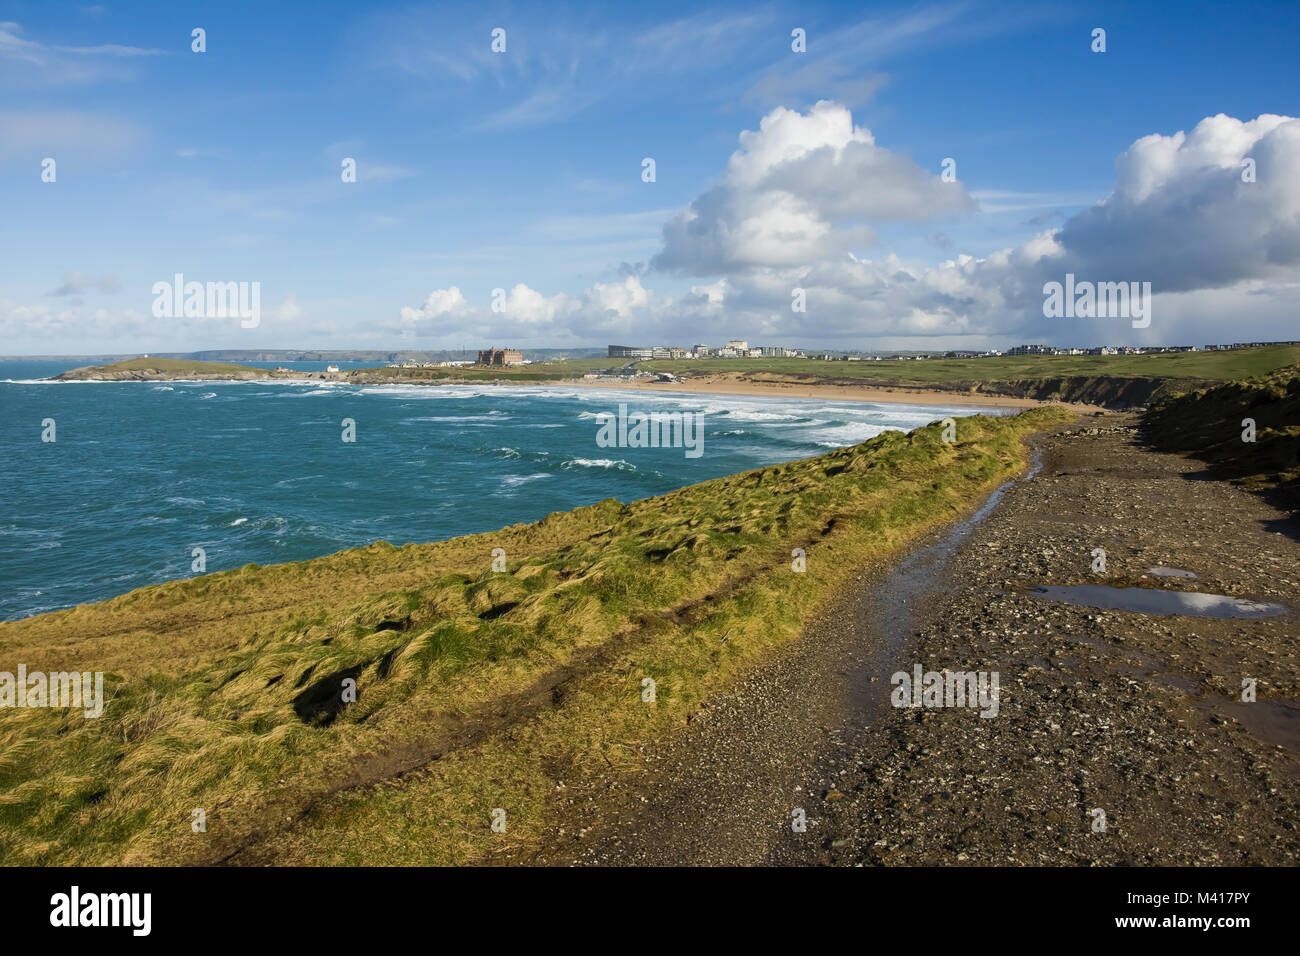 View across Fistral beach, Newquay, Cornwall. Taken while walking the path up to the Pentire headland on a very cold but pleasant afternoon. Stock Photo